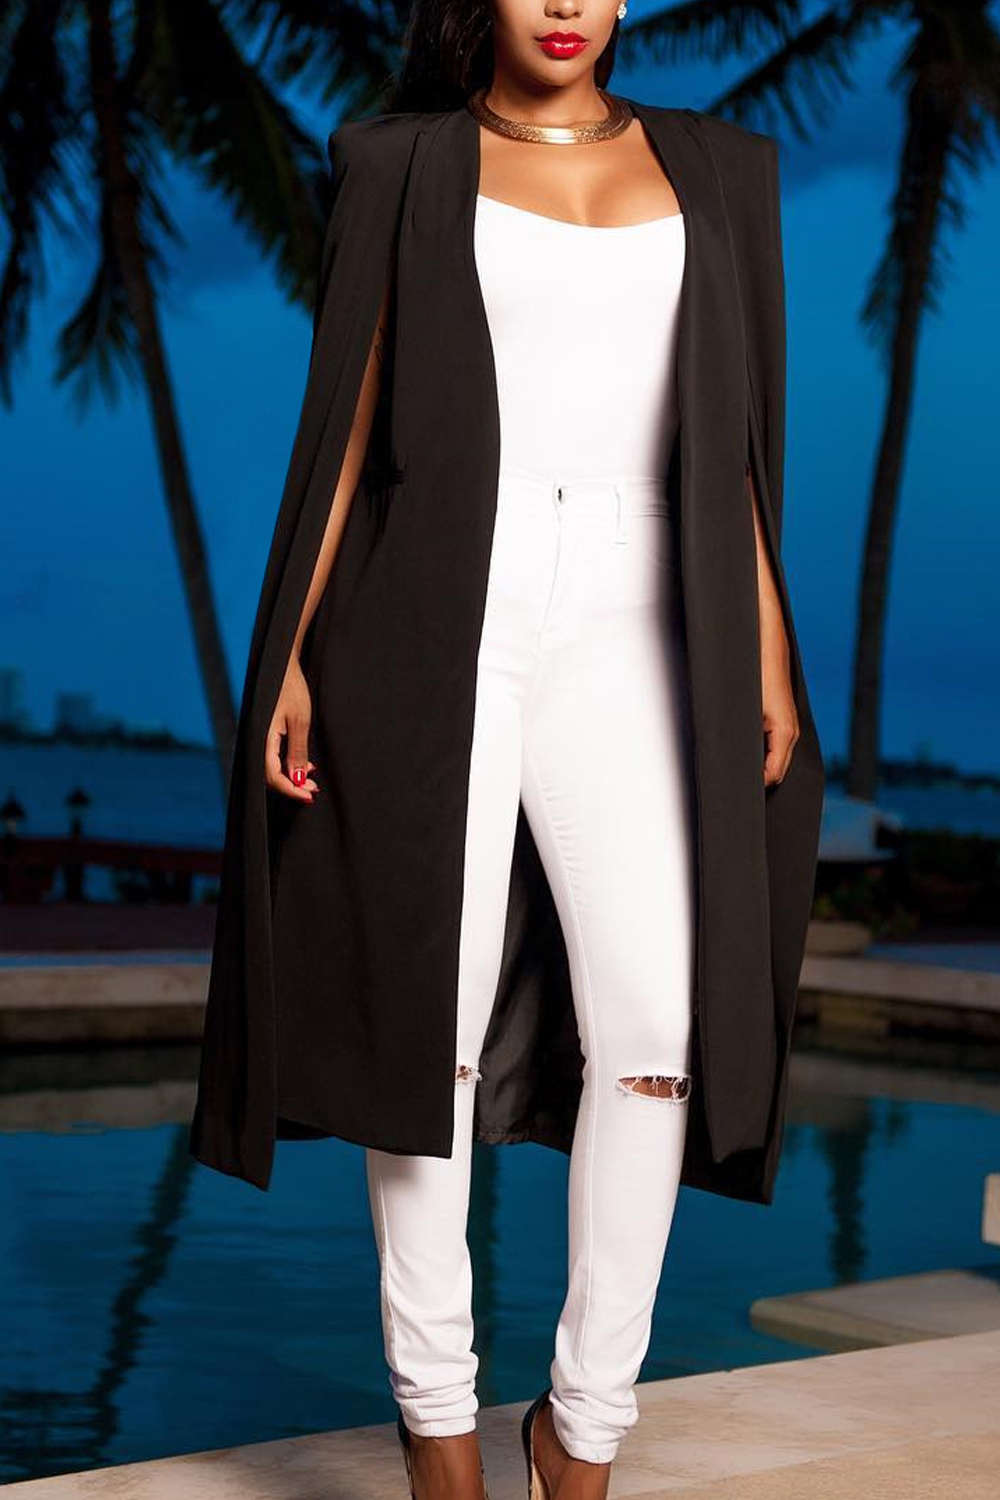 Iyasson Open Front Cape with Pocket Trench Coat